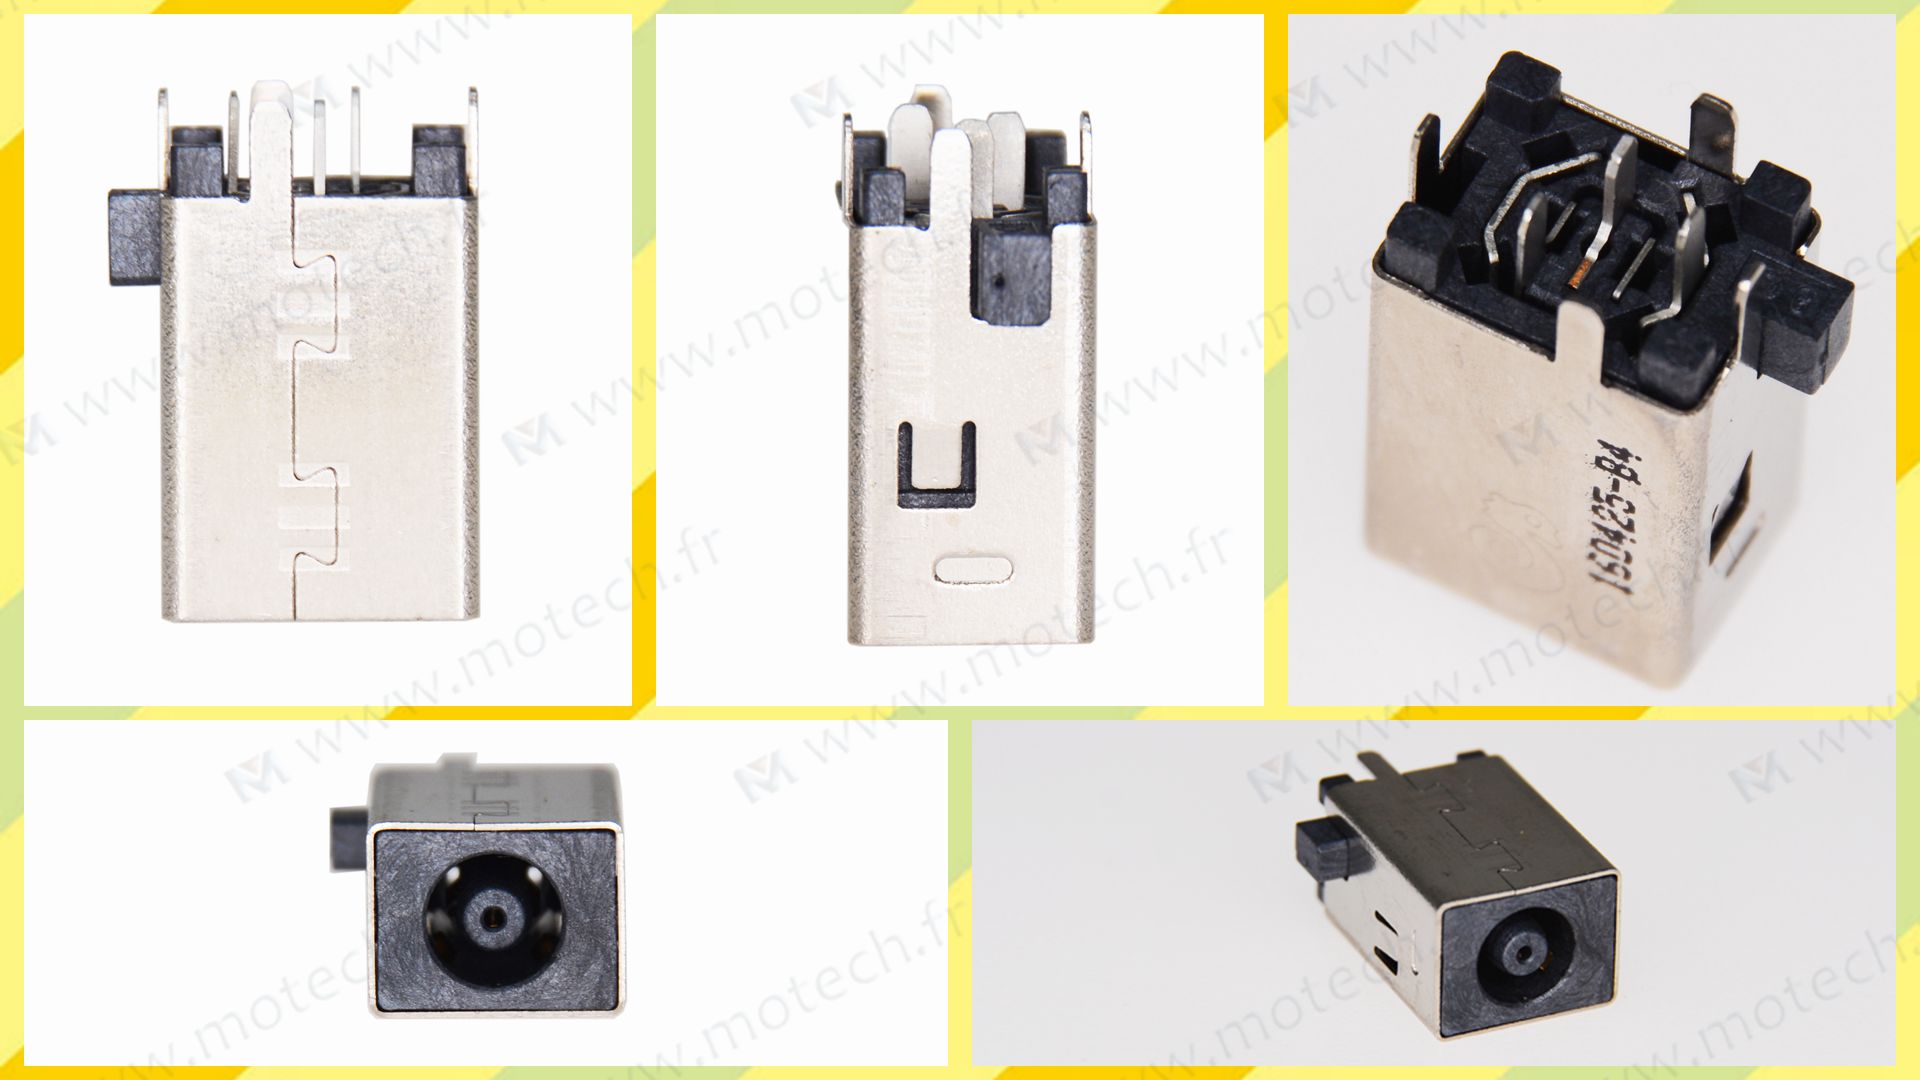 Dell 3459 AIO DC Jack, Dell 3459 AIO Jack alimentation, Dell 3459 AIO Power Jack, Dell 3459 AIO Prise Connecteur, Dell 3459 AIO Connecteur alimentation, Dell 3459 AIO connecteur de charge, 